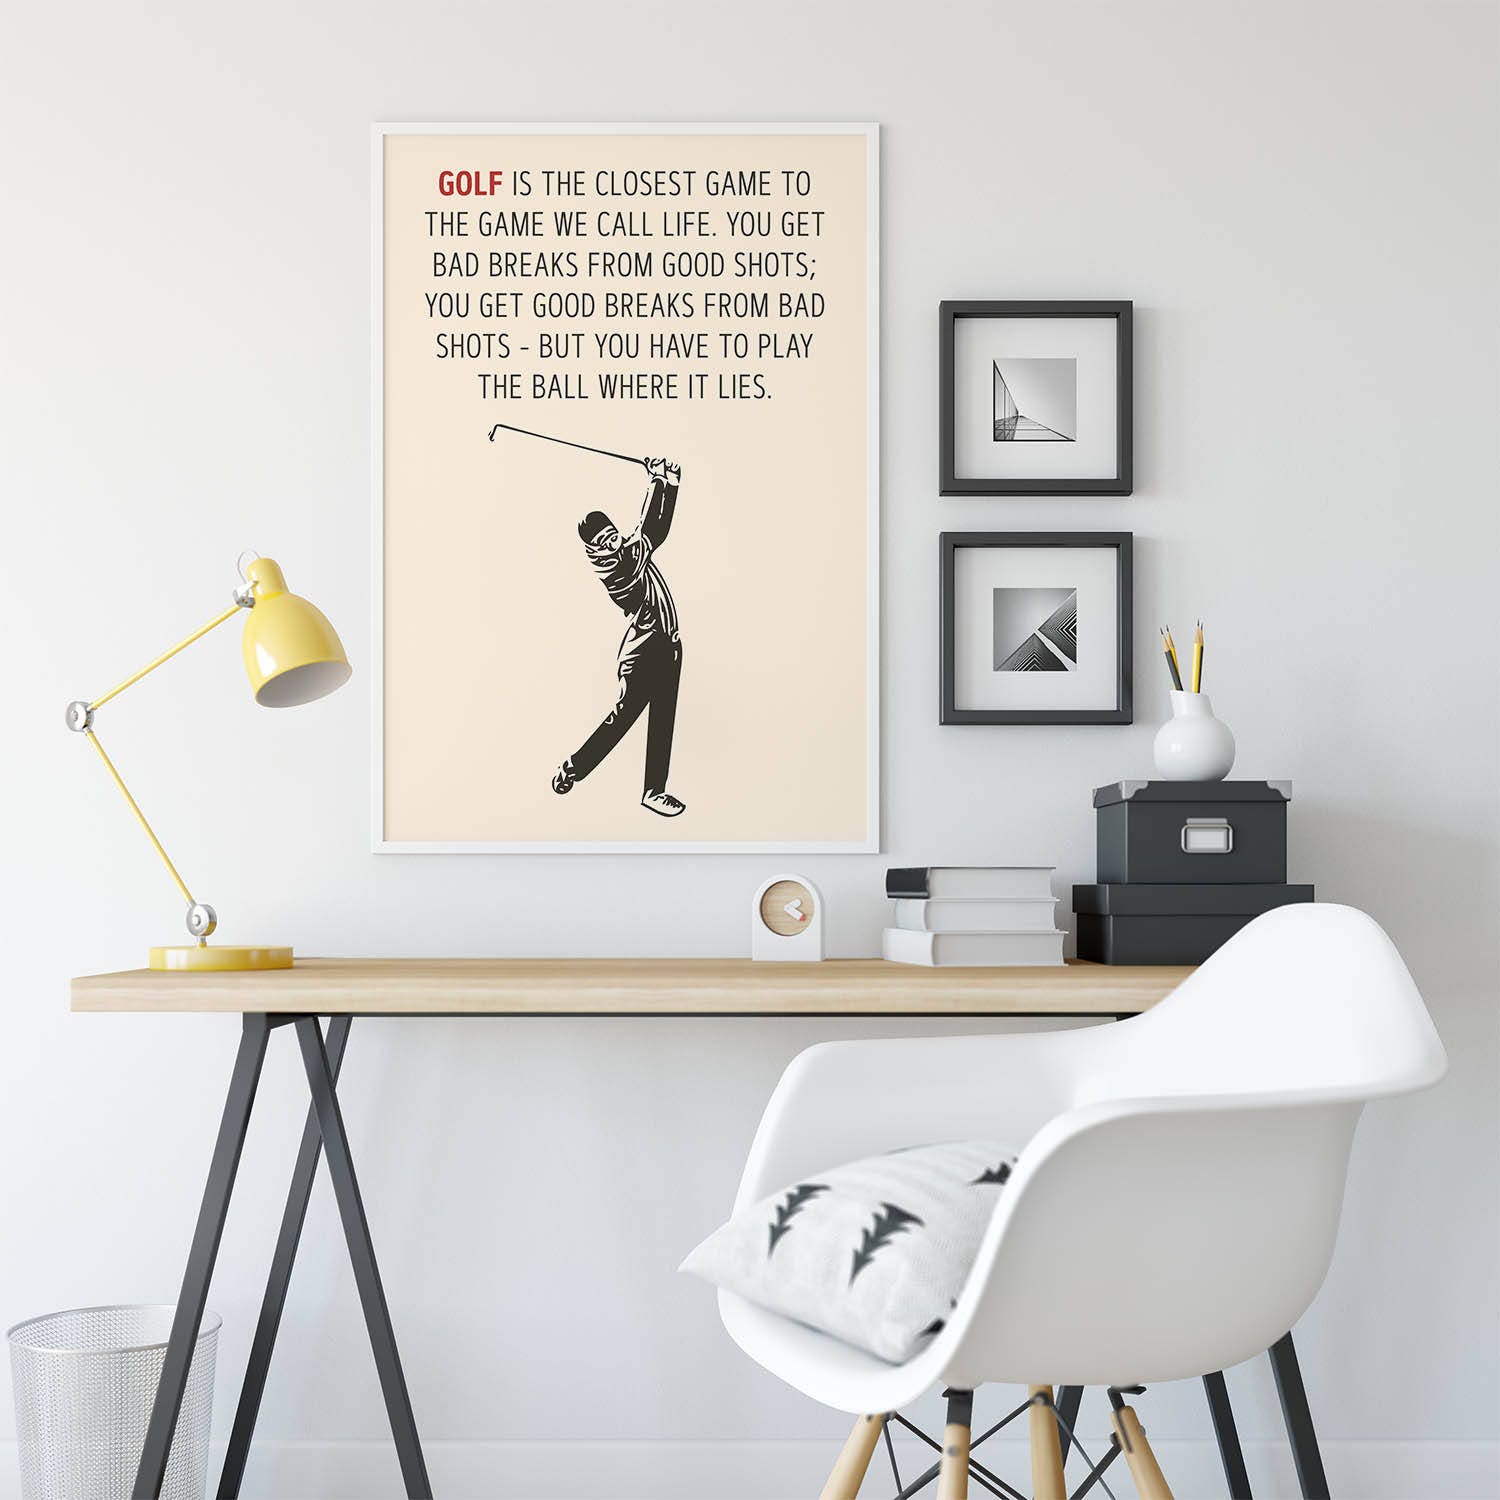 Golf is the Closest Game to Life Bobby Jones Golf Quote 